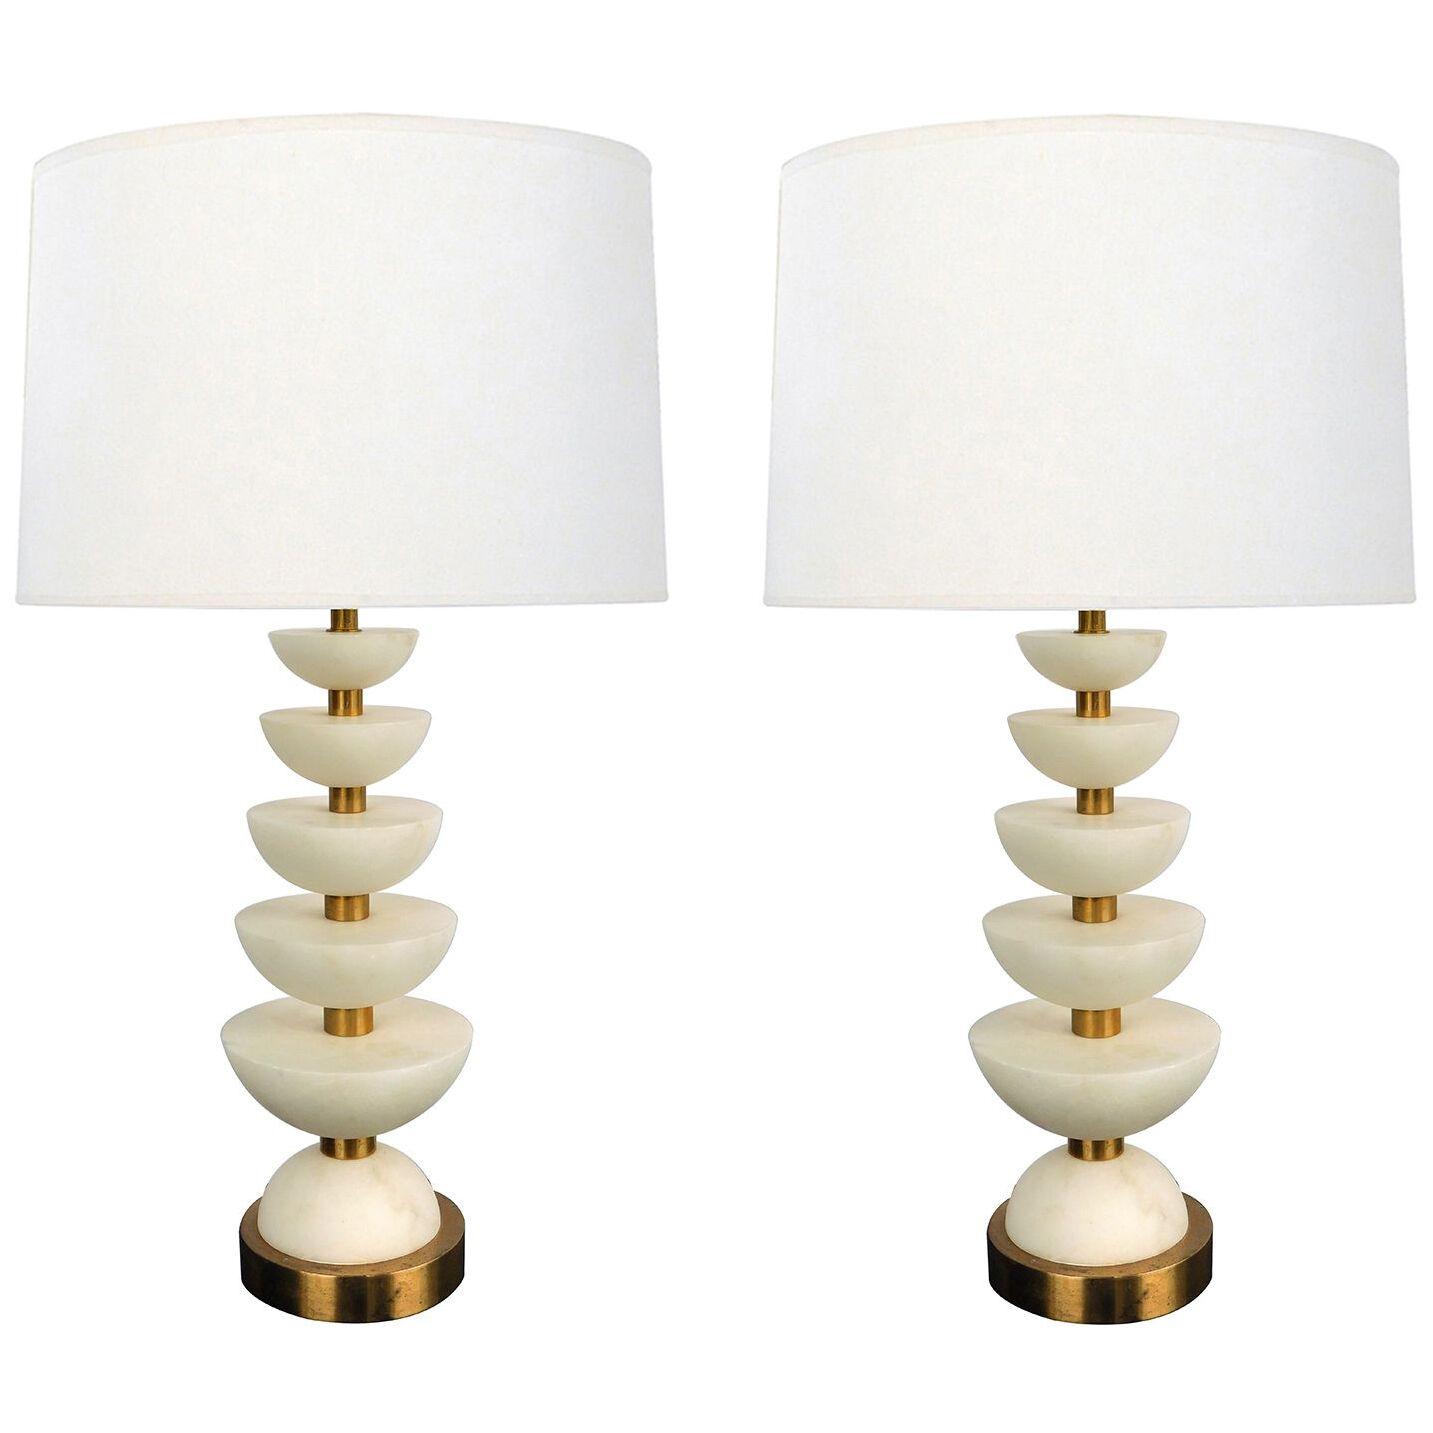 Pair of English Brass and Alabaster 'Positano' Lamps by Vaughan, London